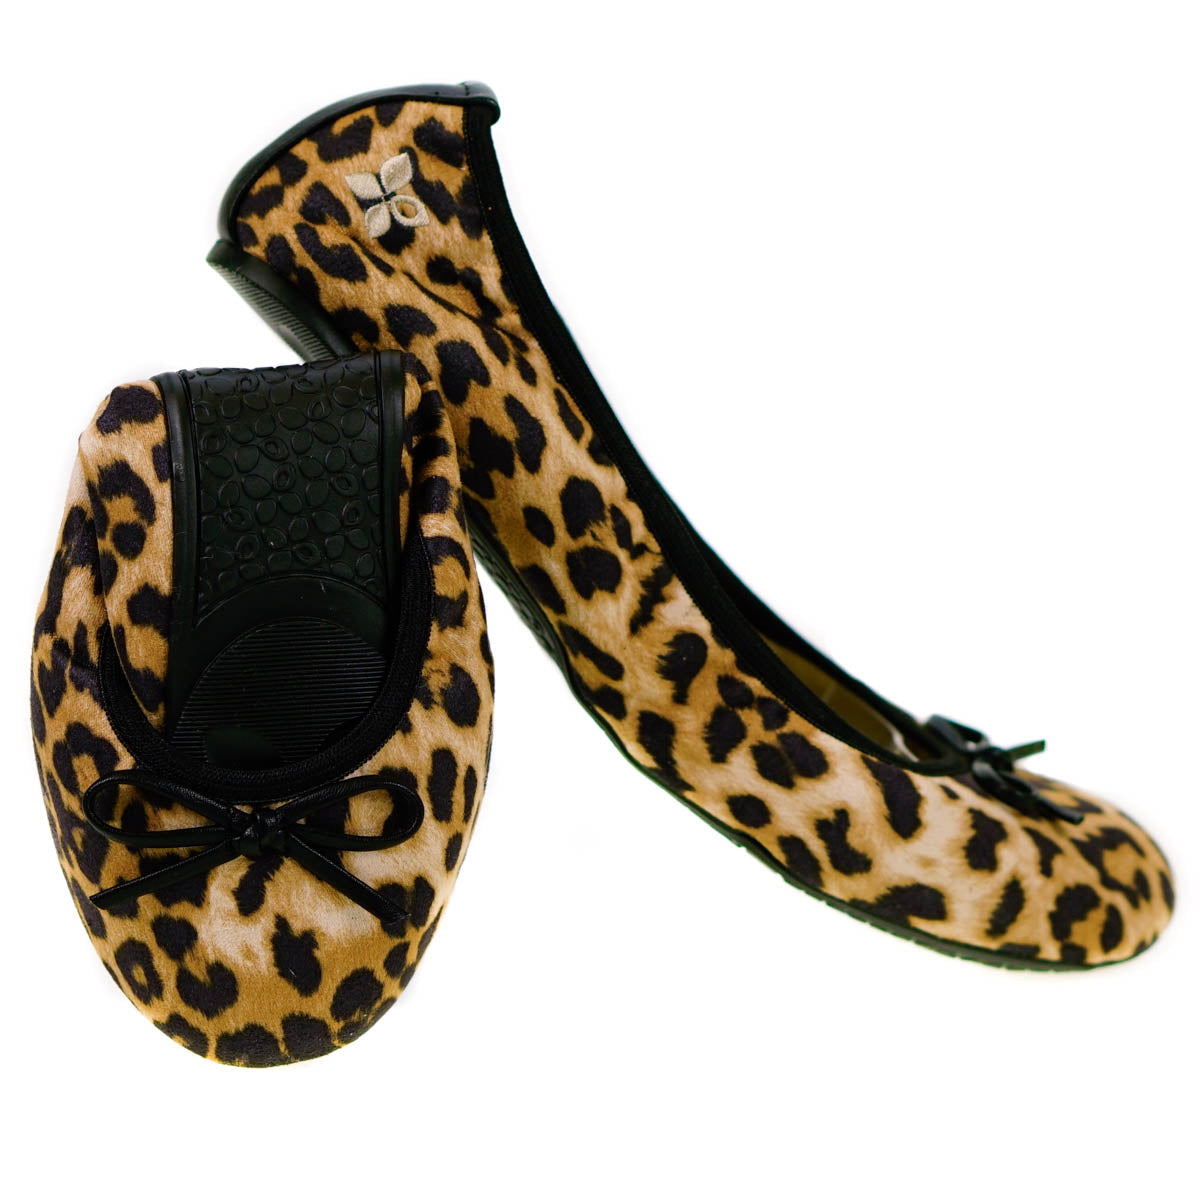 Butterfly Twists Cleo Fold Up Ballerina Shoes Leopard Size 3 (36)